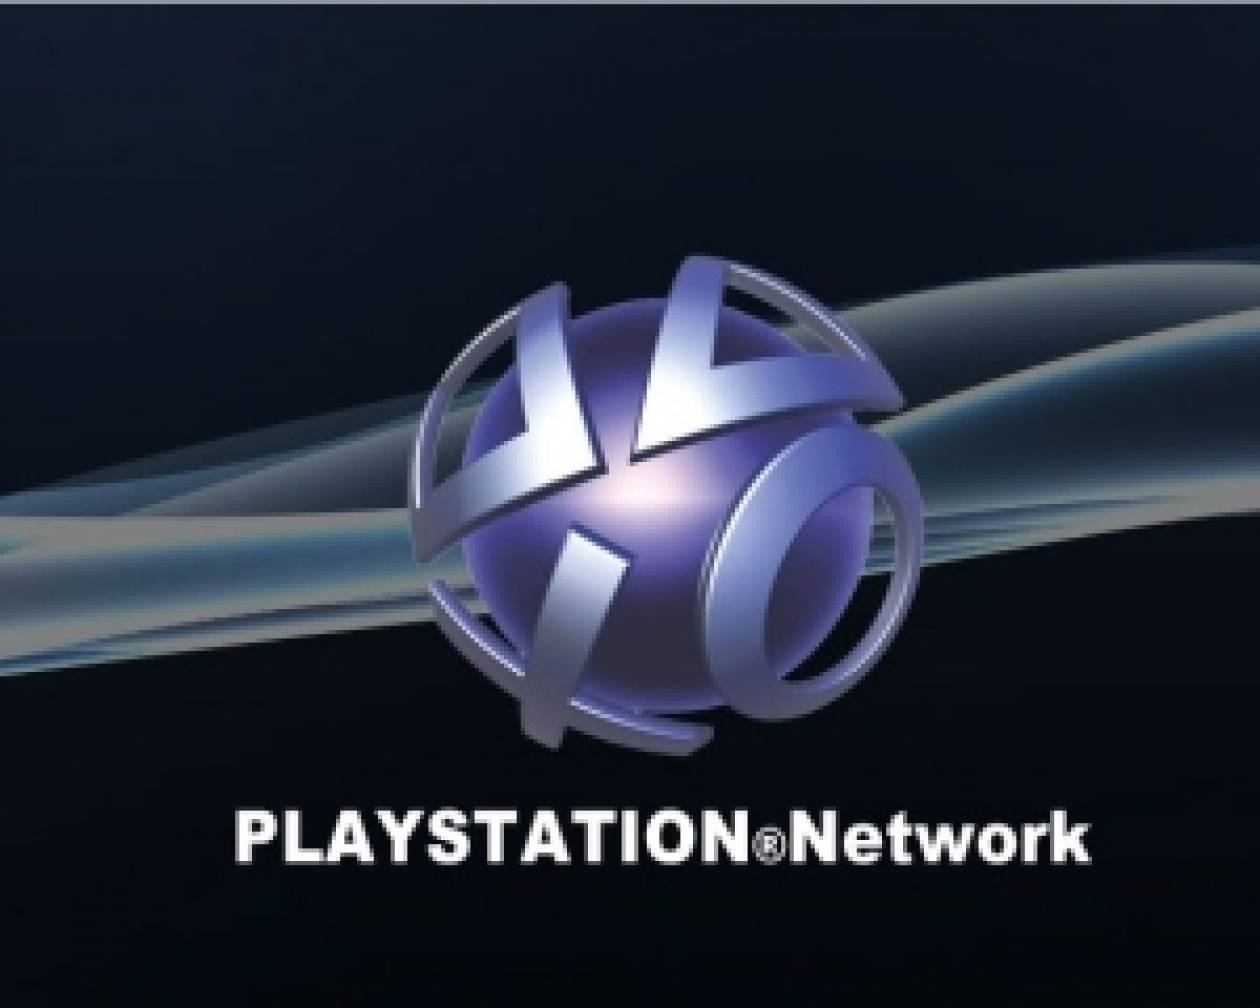 To Playstation Network εξαπλώνεται παρά τα προβλήματα